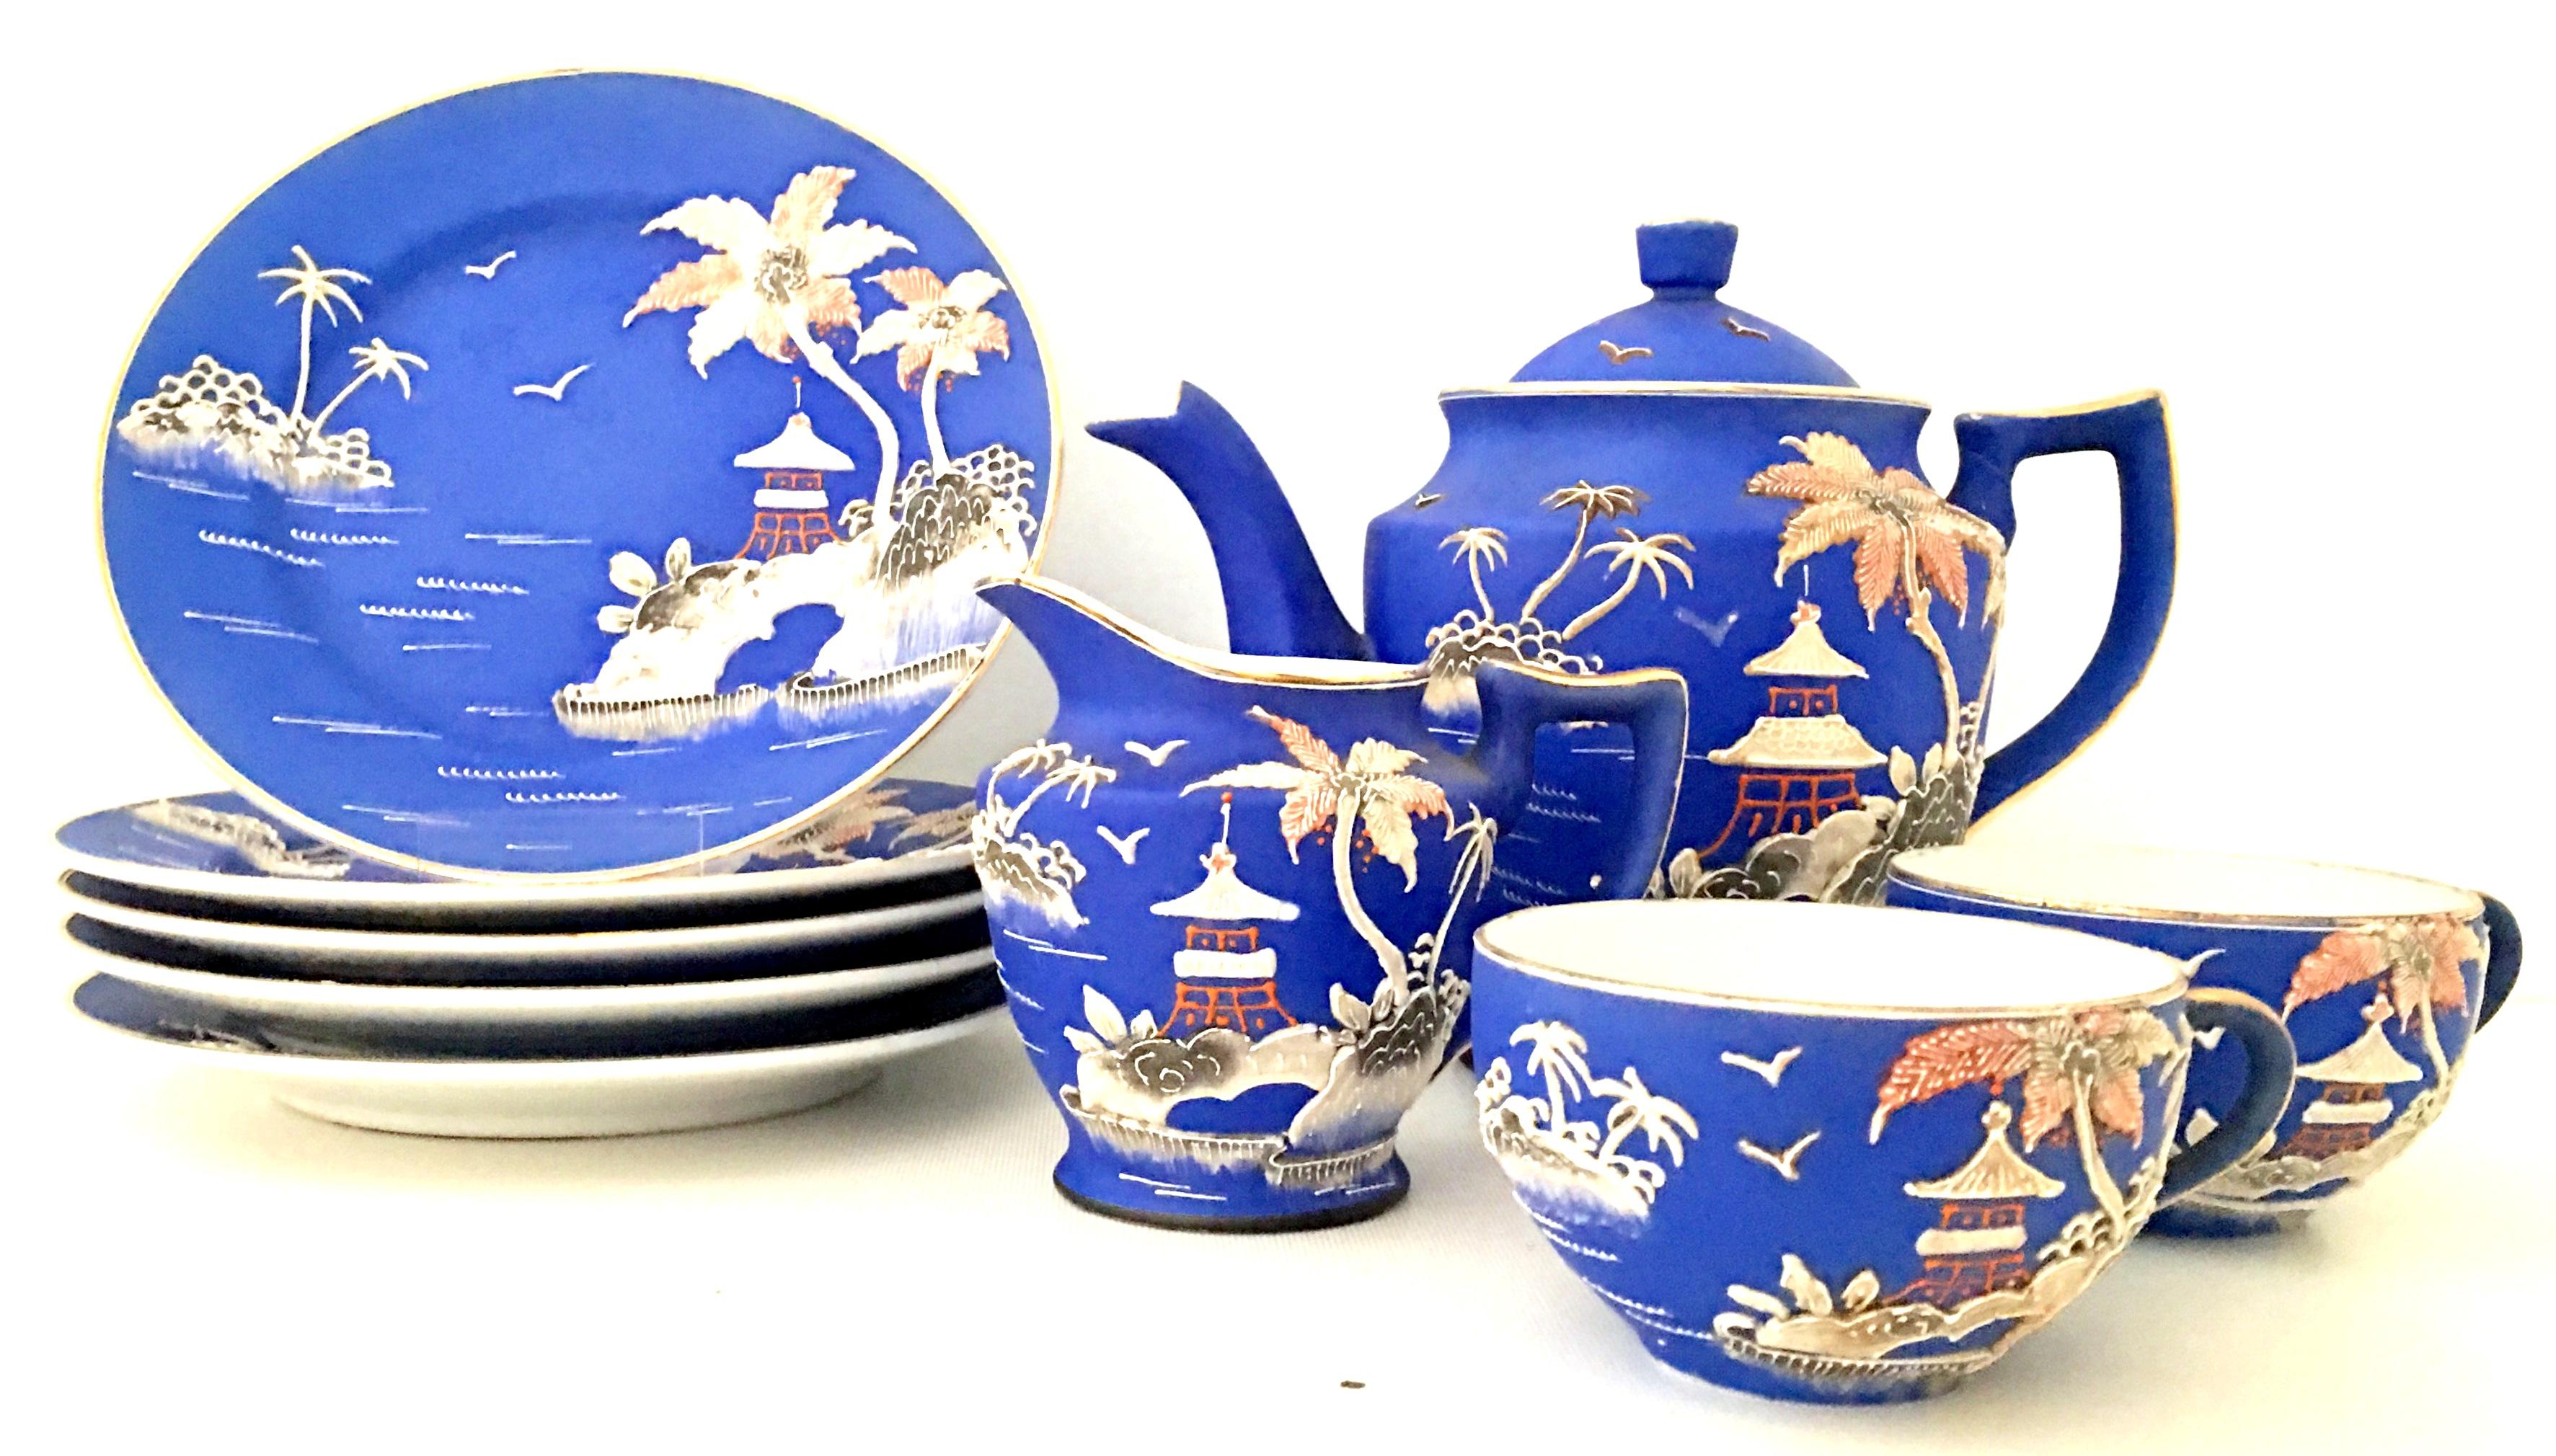 Antique Japanese Porcelain Hand Painted Moriage Coffee-Dessert ,Ten Piece Set. This rare palm tree and pagoda motif, features a vibrant blue ground with orange, white, black and 22-karat gold detail. Set includes five plates, two tea cups, one